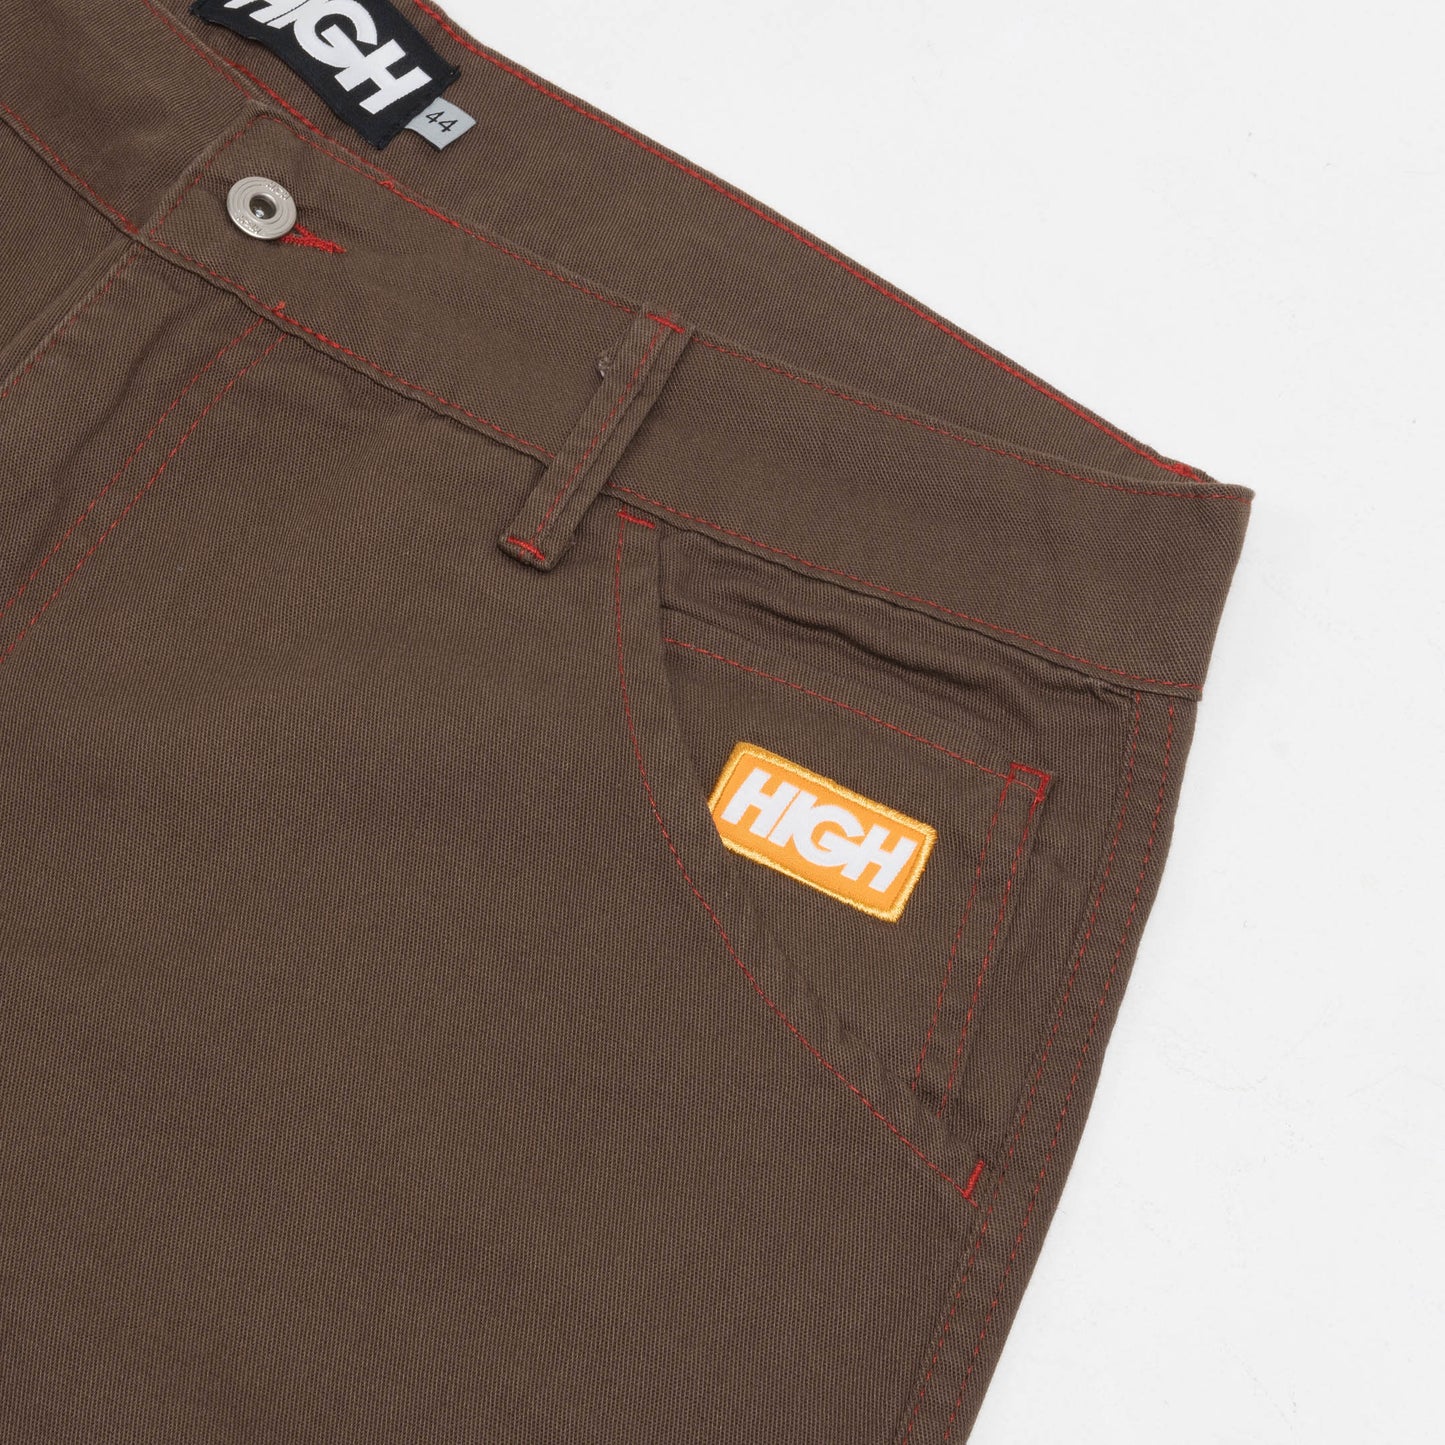 High Company Chino Shorts Colored Brown/Red